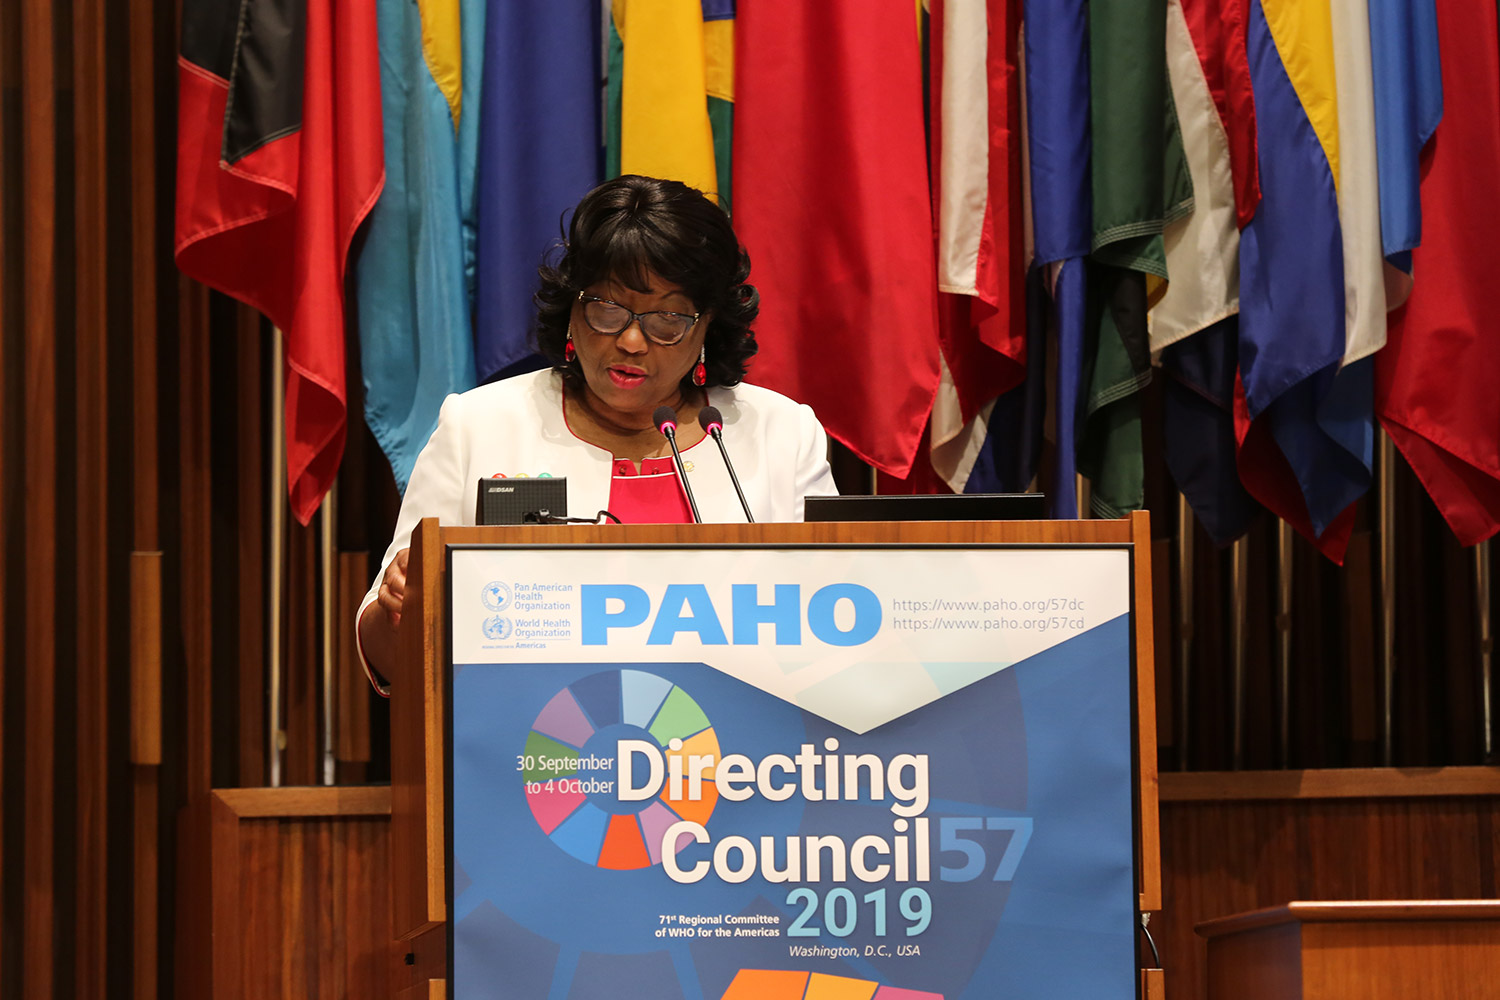 PAHO Director, Carissa F. Etienne, inaugurates the 57th Directing Council before the Ministers of Health of the Americas.